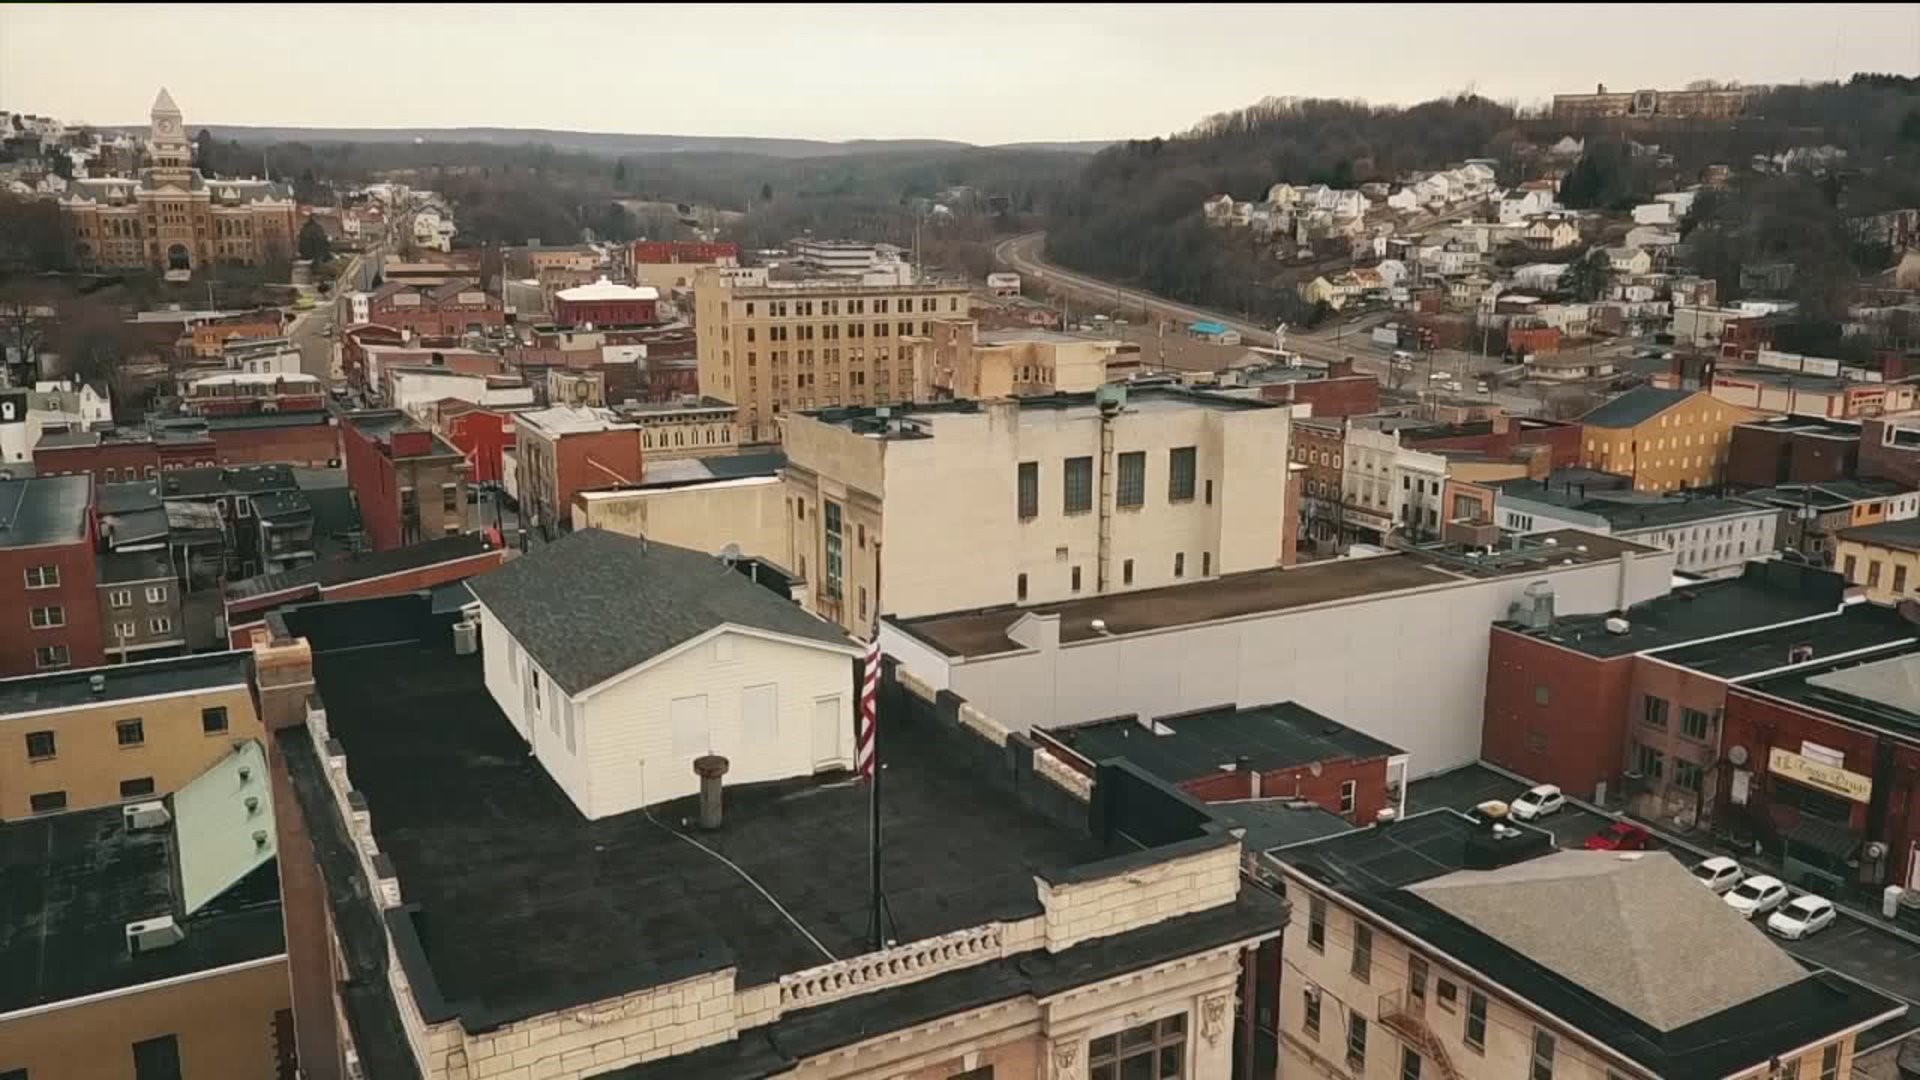 'Pottsville is coming back' - Business Leaders Hopeful about Downtown Revival